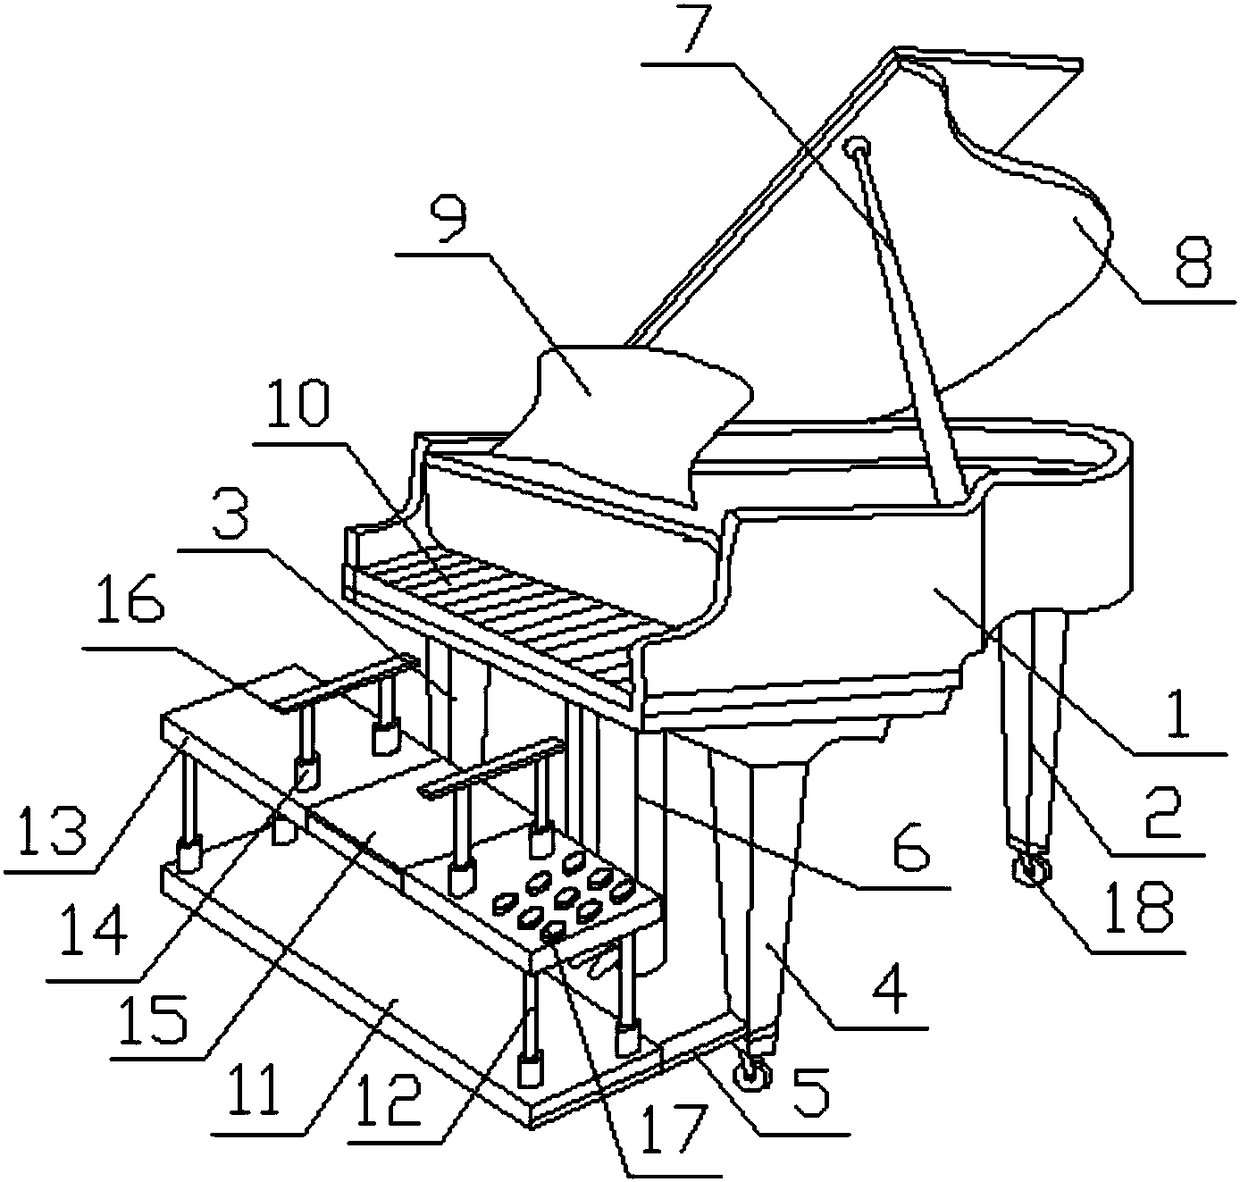 Piano seat with massaging function